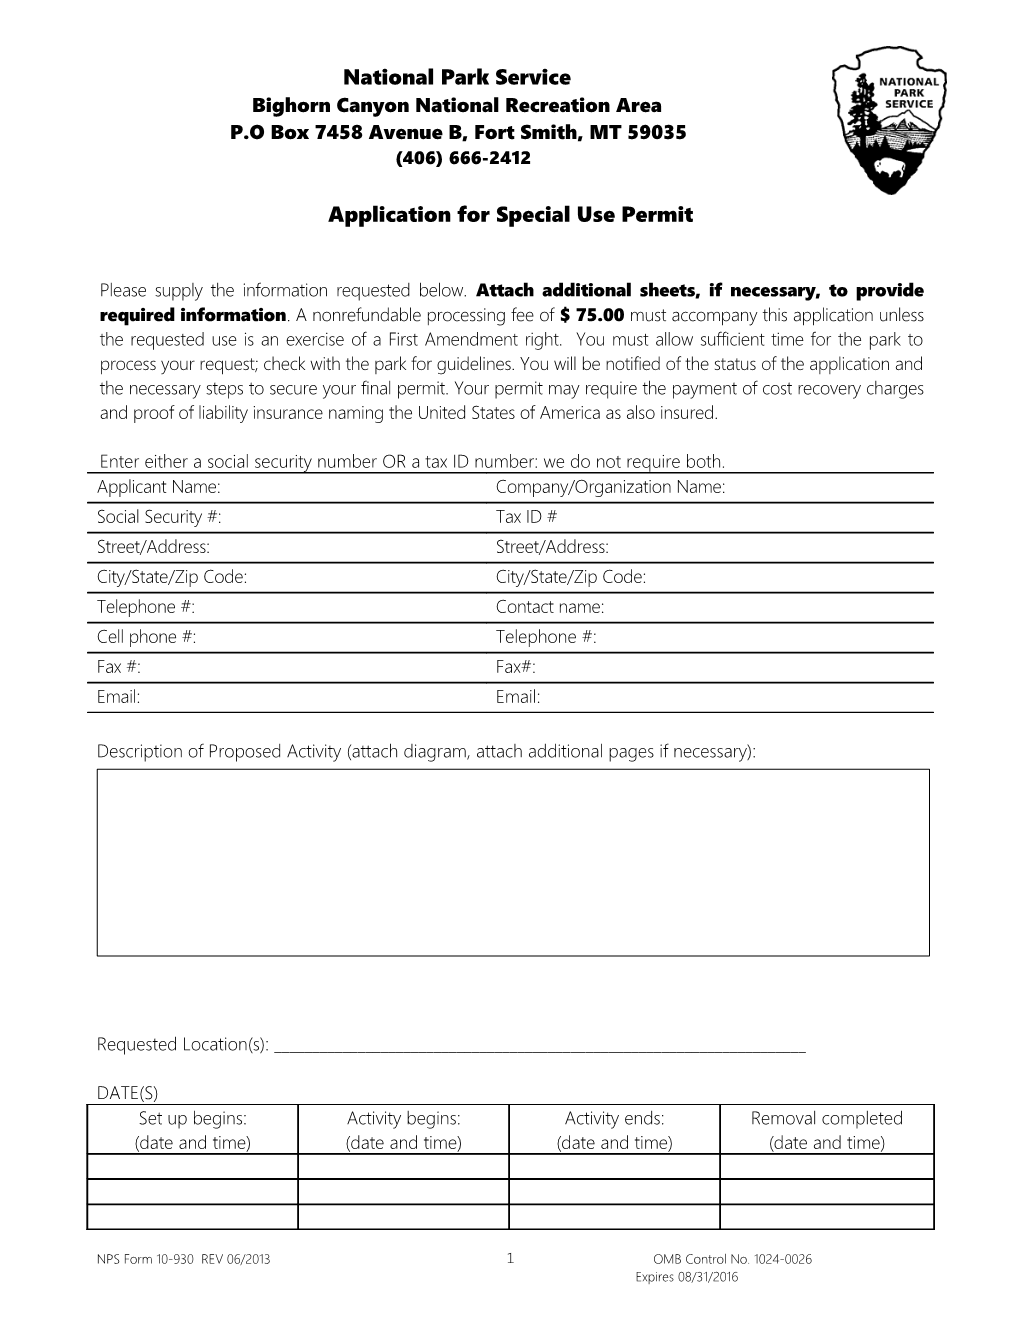 Application for Special Use Permit Long Form